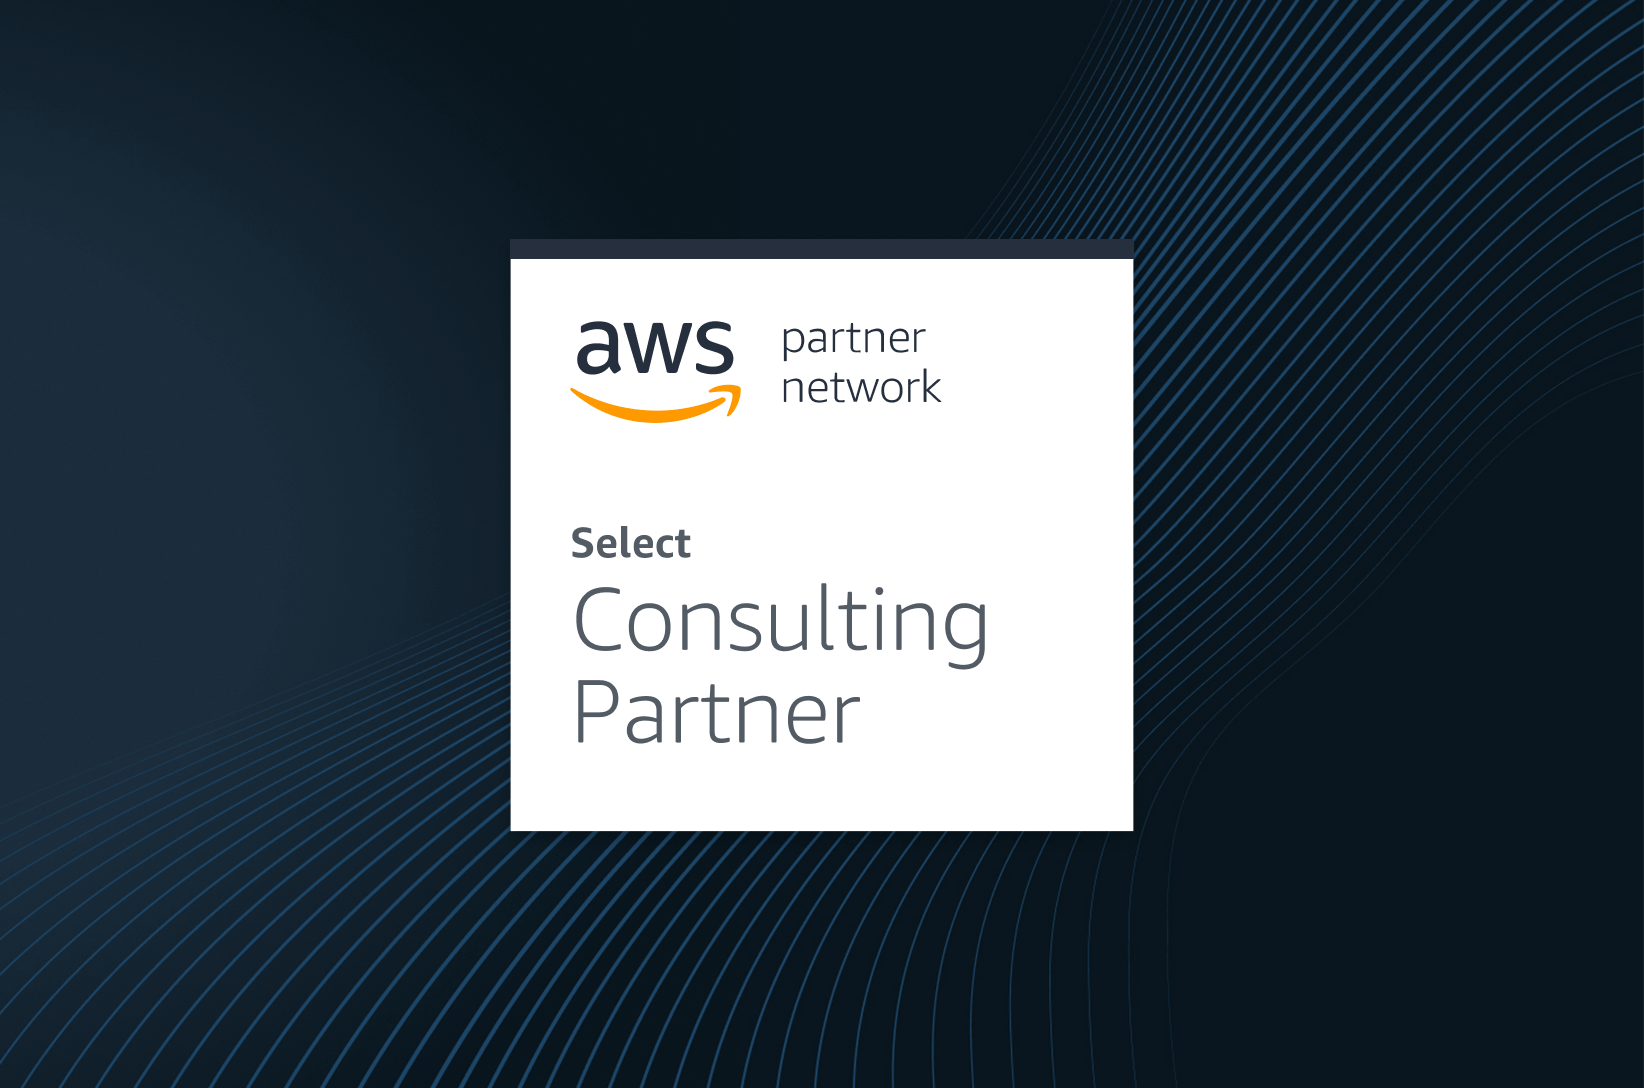 Symphony Solutions achieves Select Consulting Partner status in AWS Partner Network